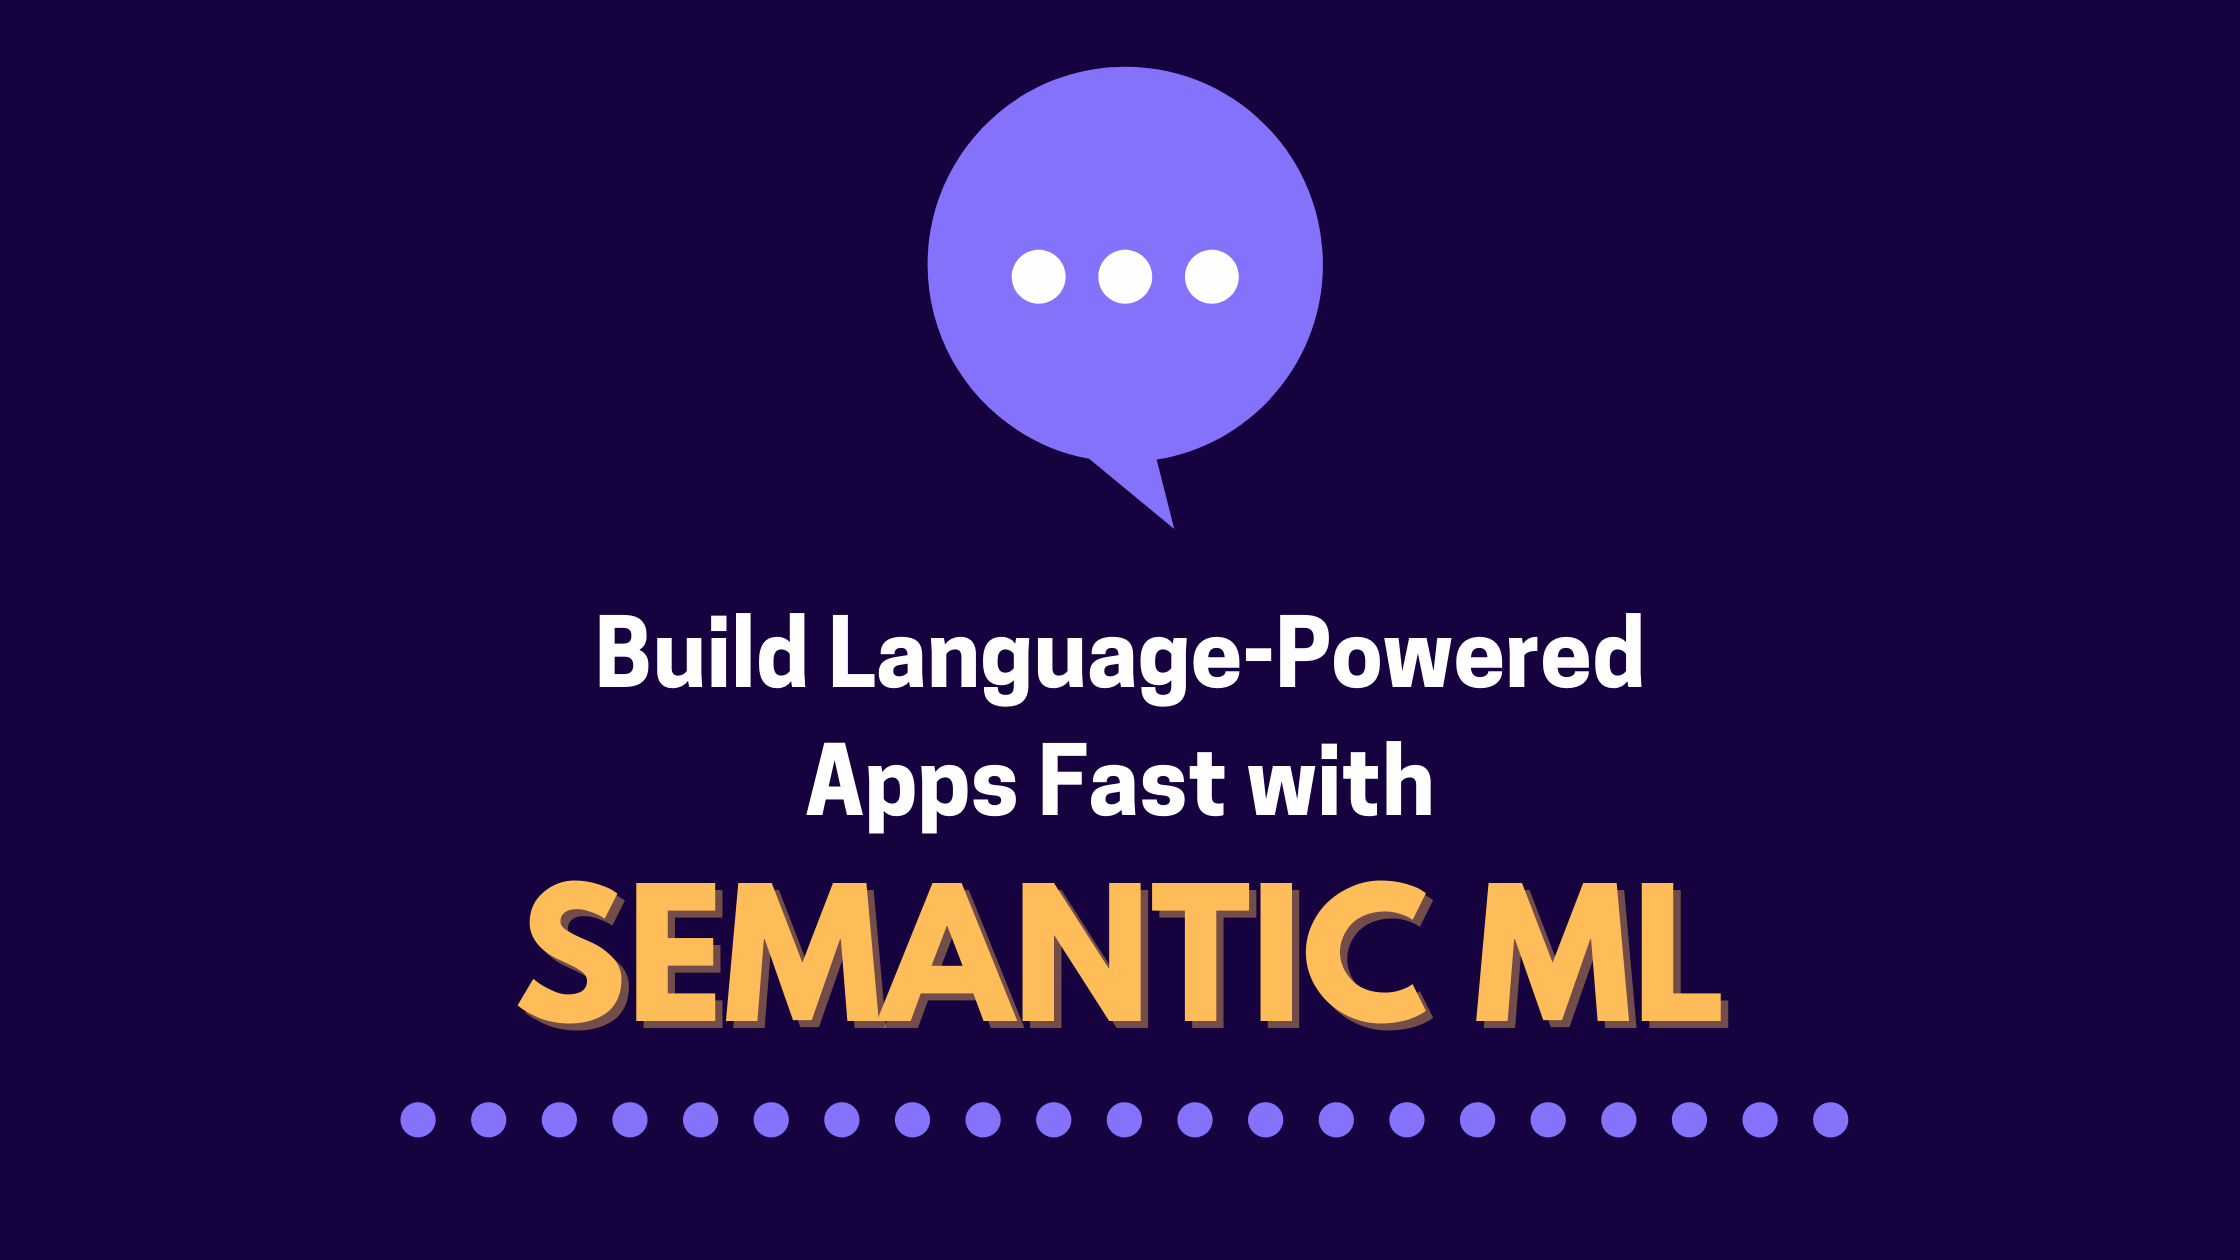 Build Apps Powered by Language with Semantic ML